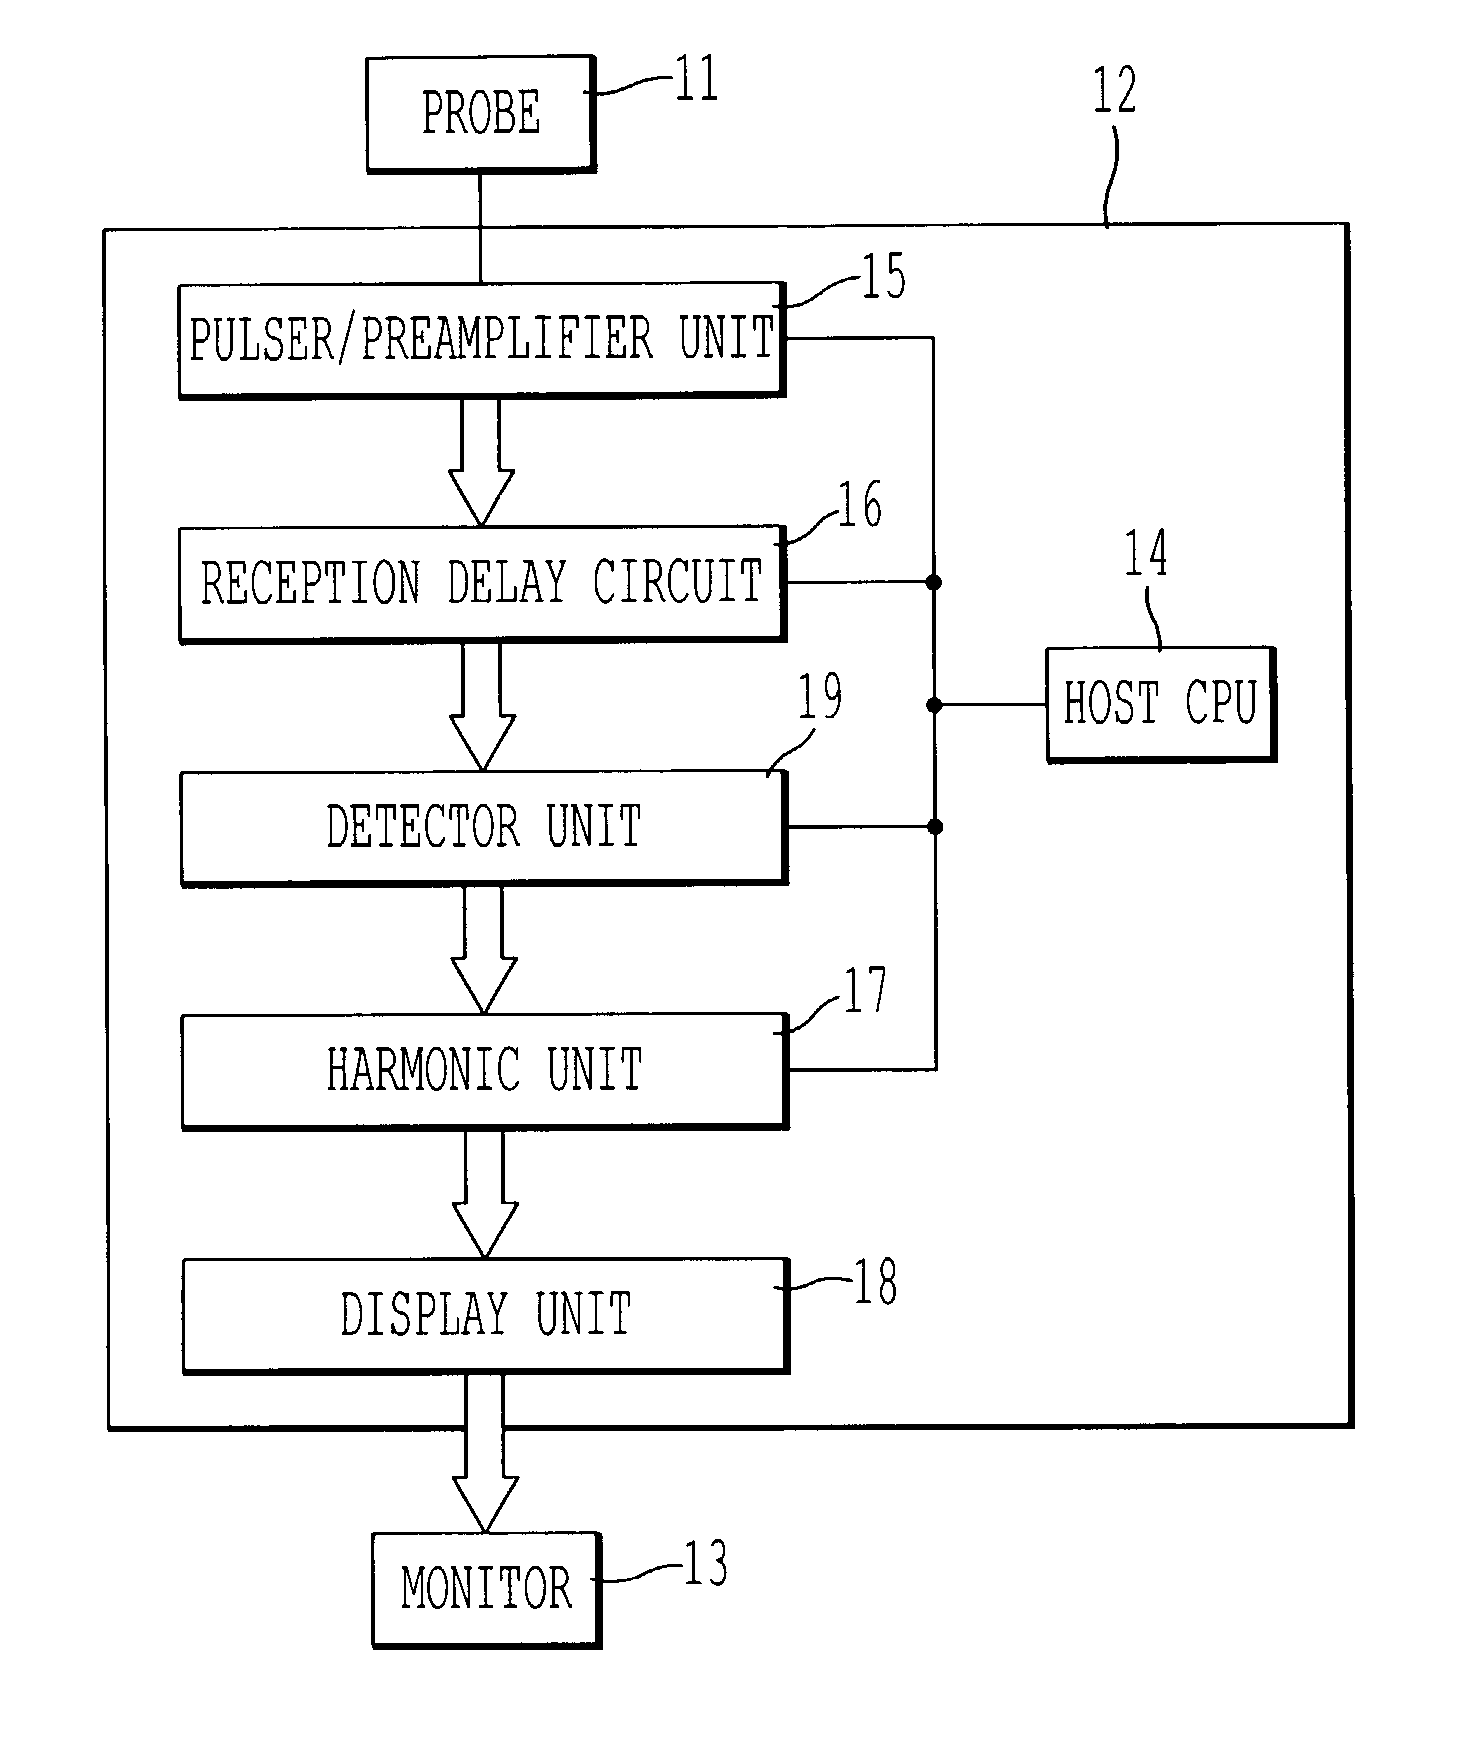 Apparatus and method for ultrasonic diagnostic imaging